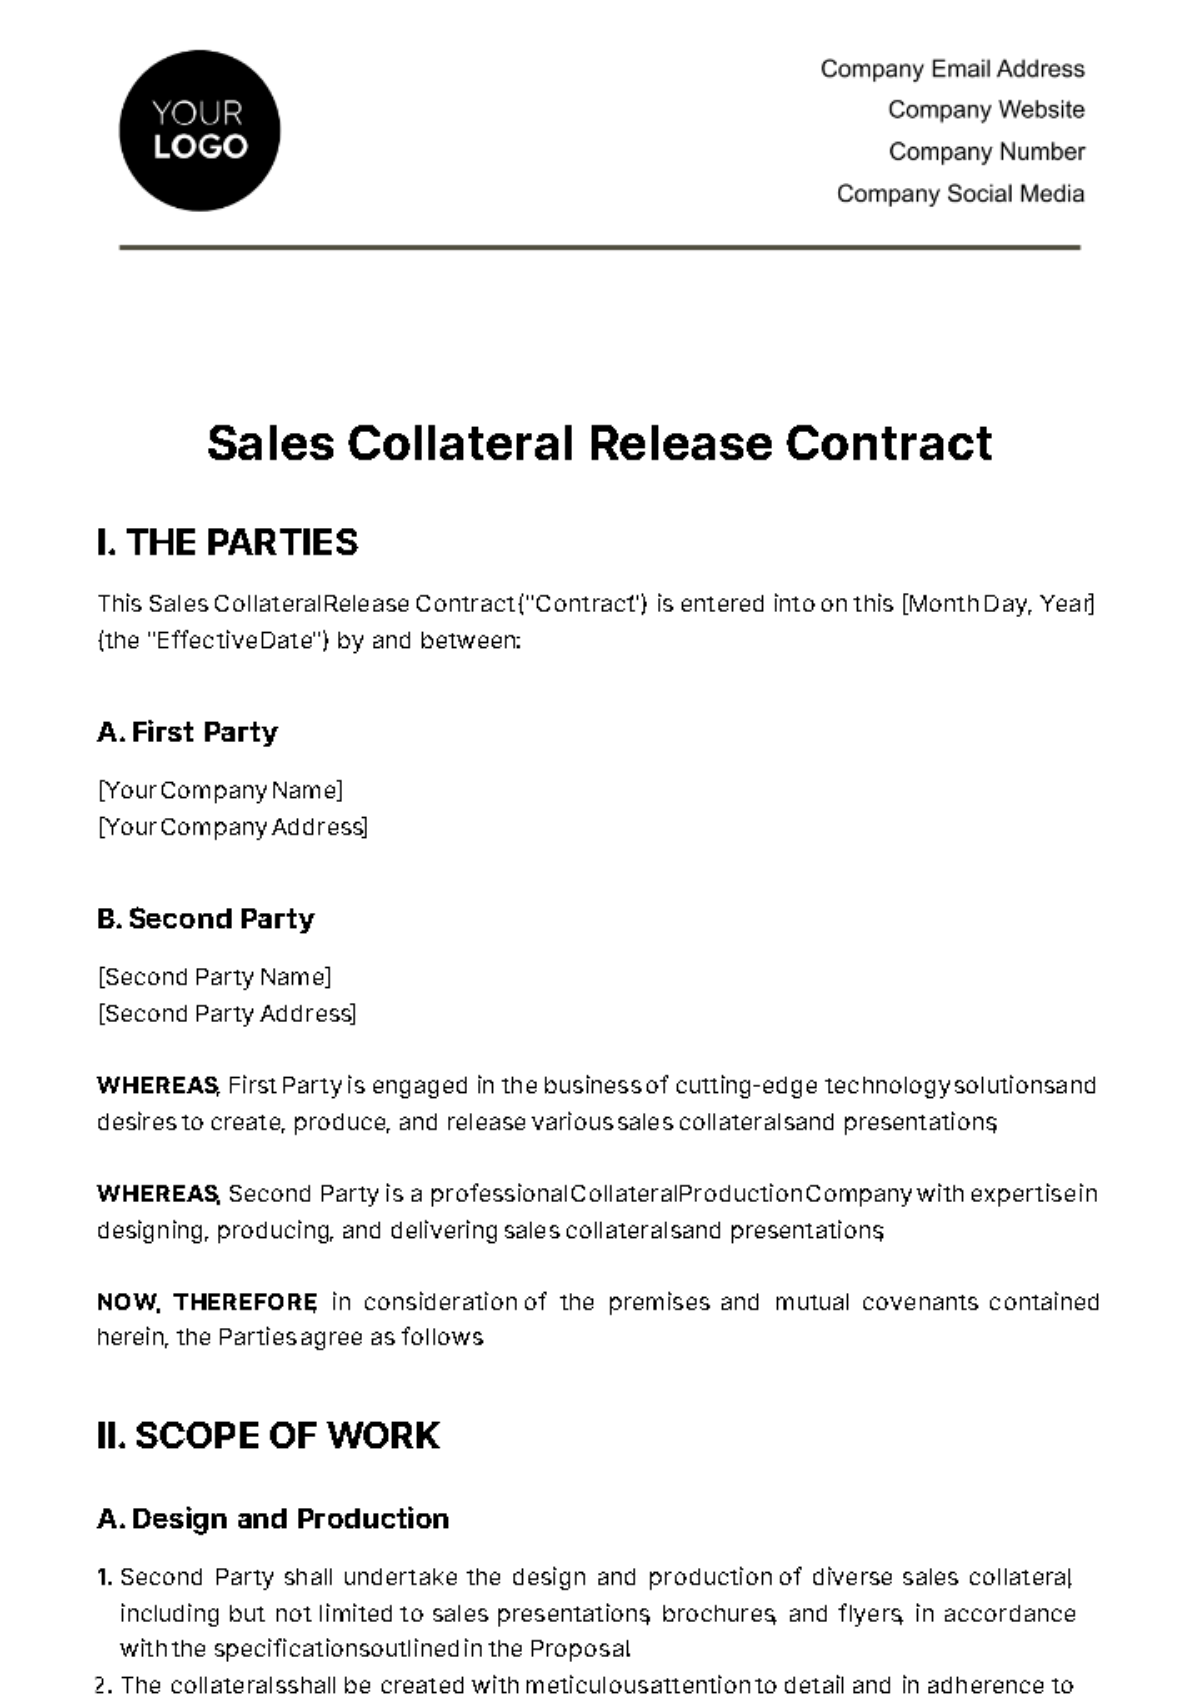 Sales Collateral Release Contract Template